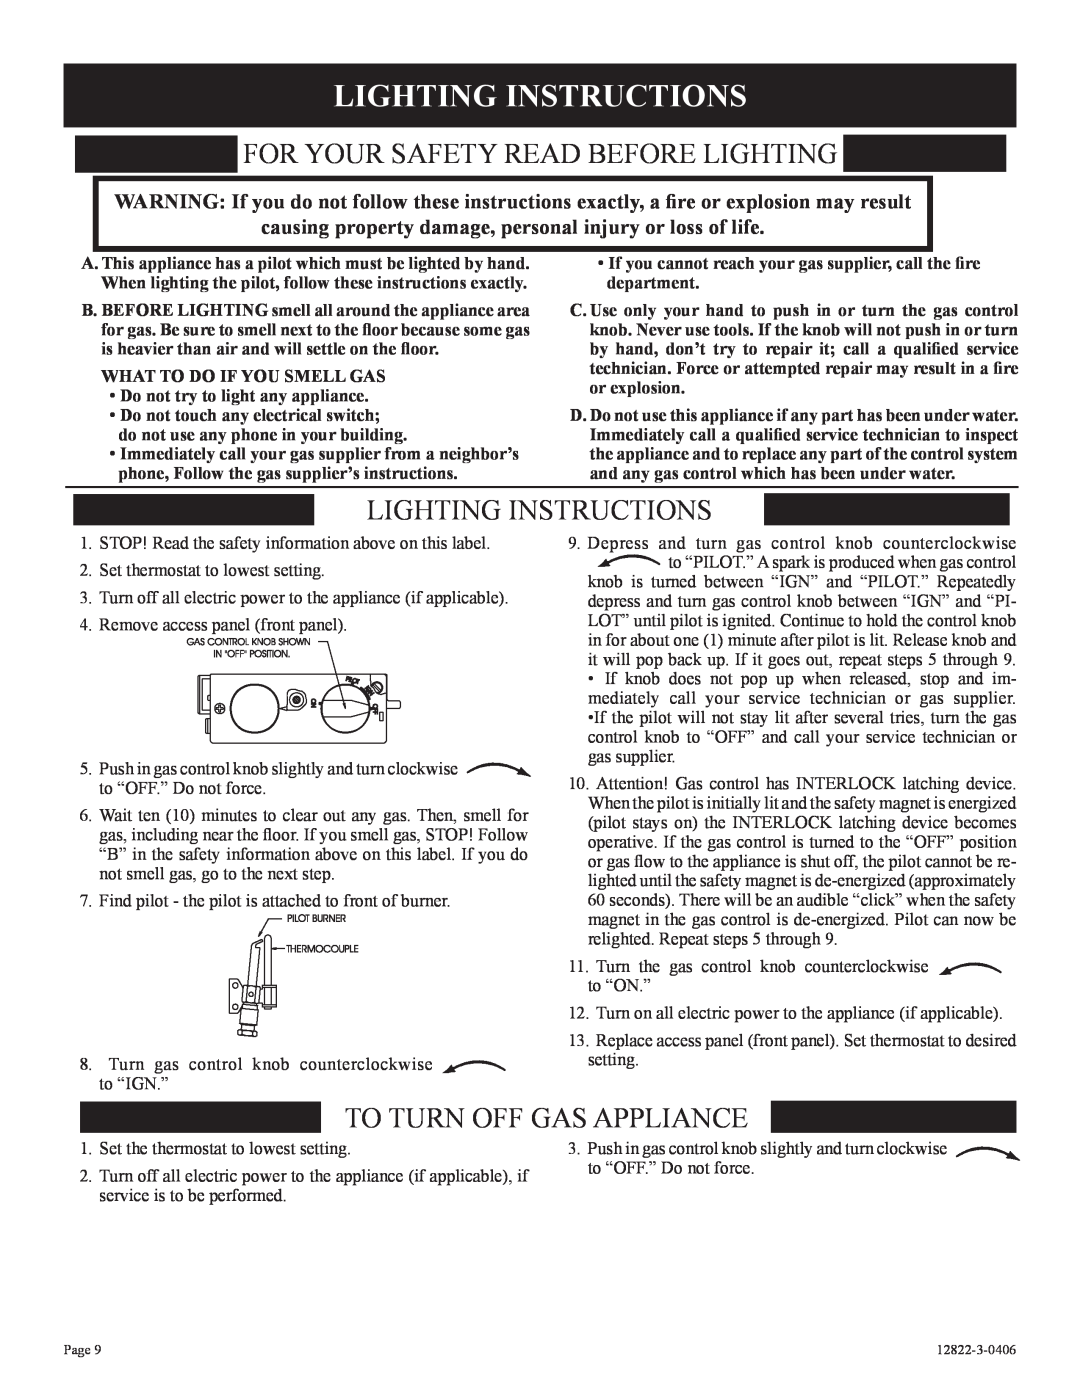 Empire Products RH-50-6 Lighting Instructions, For Your Safety Read Before Lighting, To Turn Off Gas Appliance 